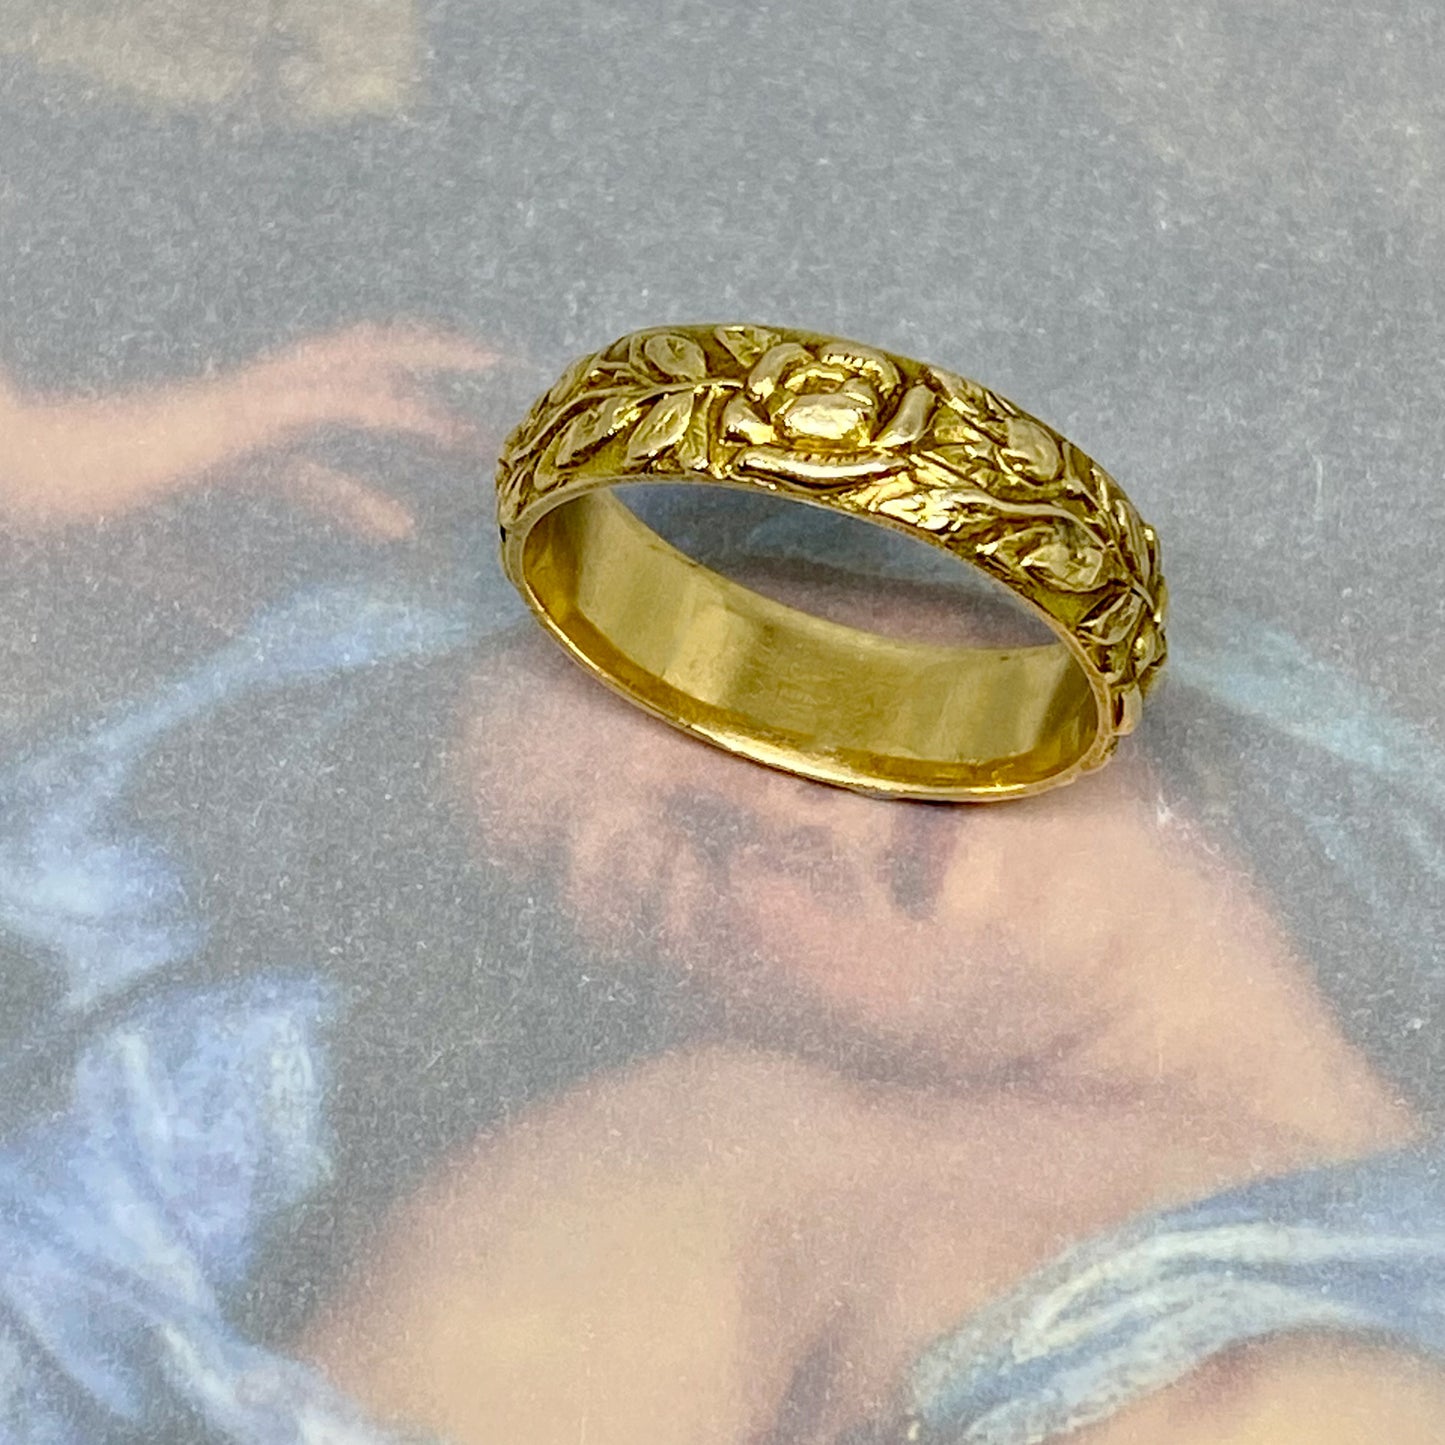 Antique 18k Gold Chased Floral Ring, Victorian Romantic 18 ct Gold Wedding Band Ring